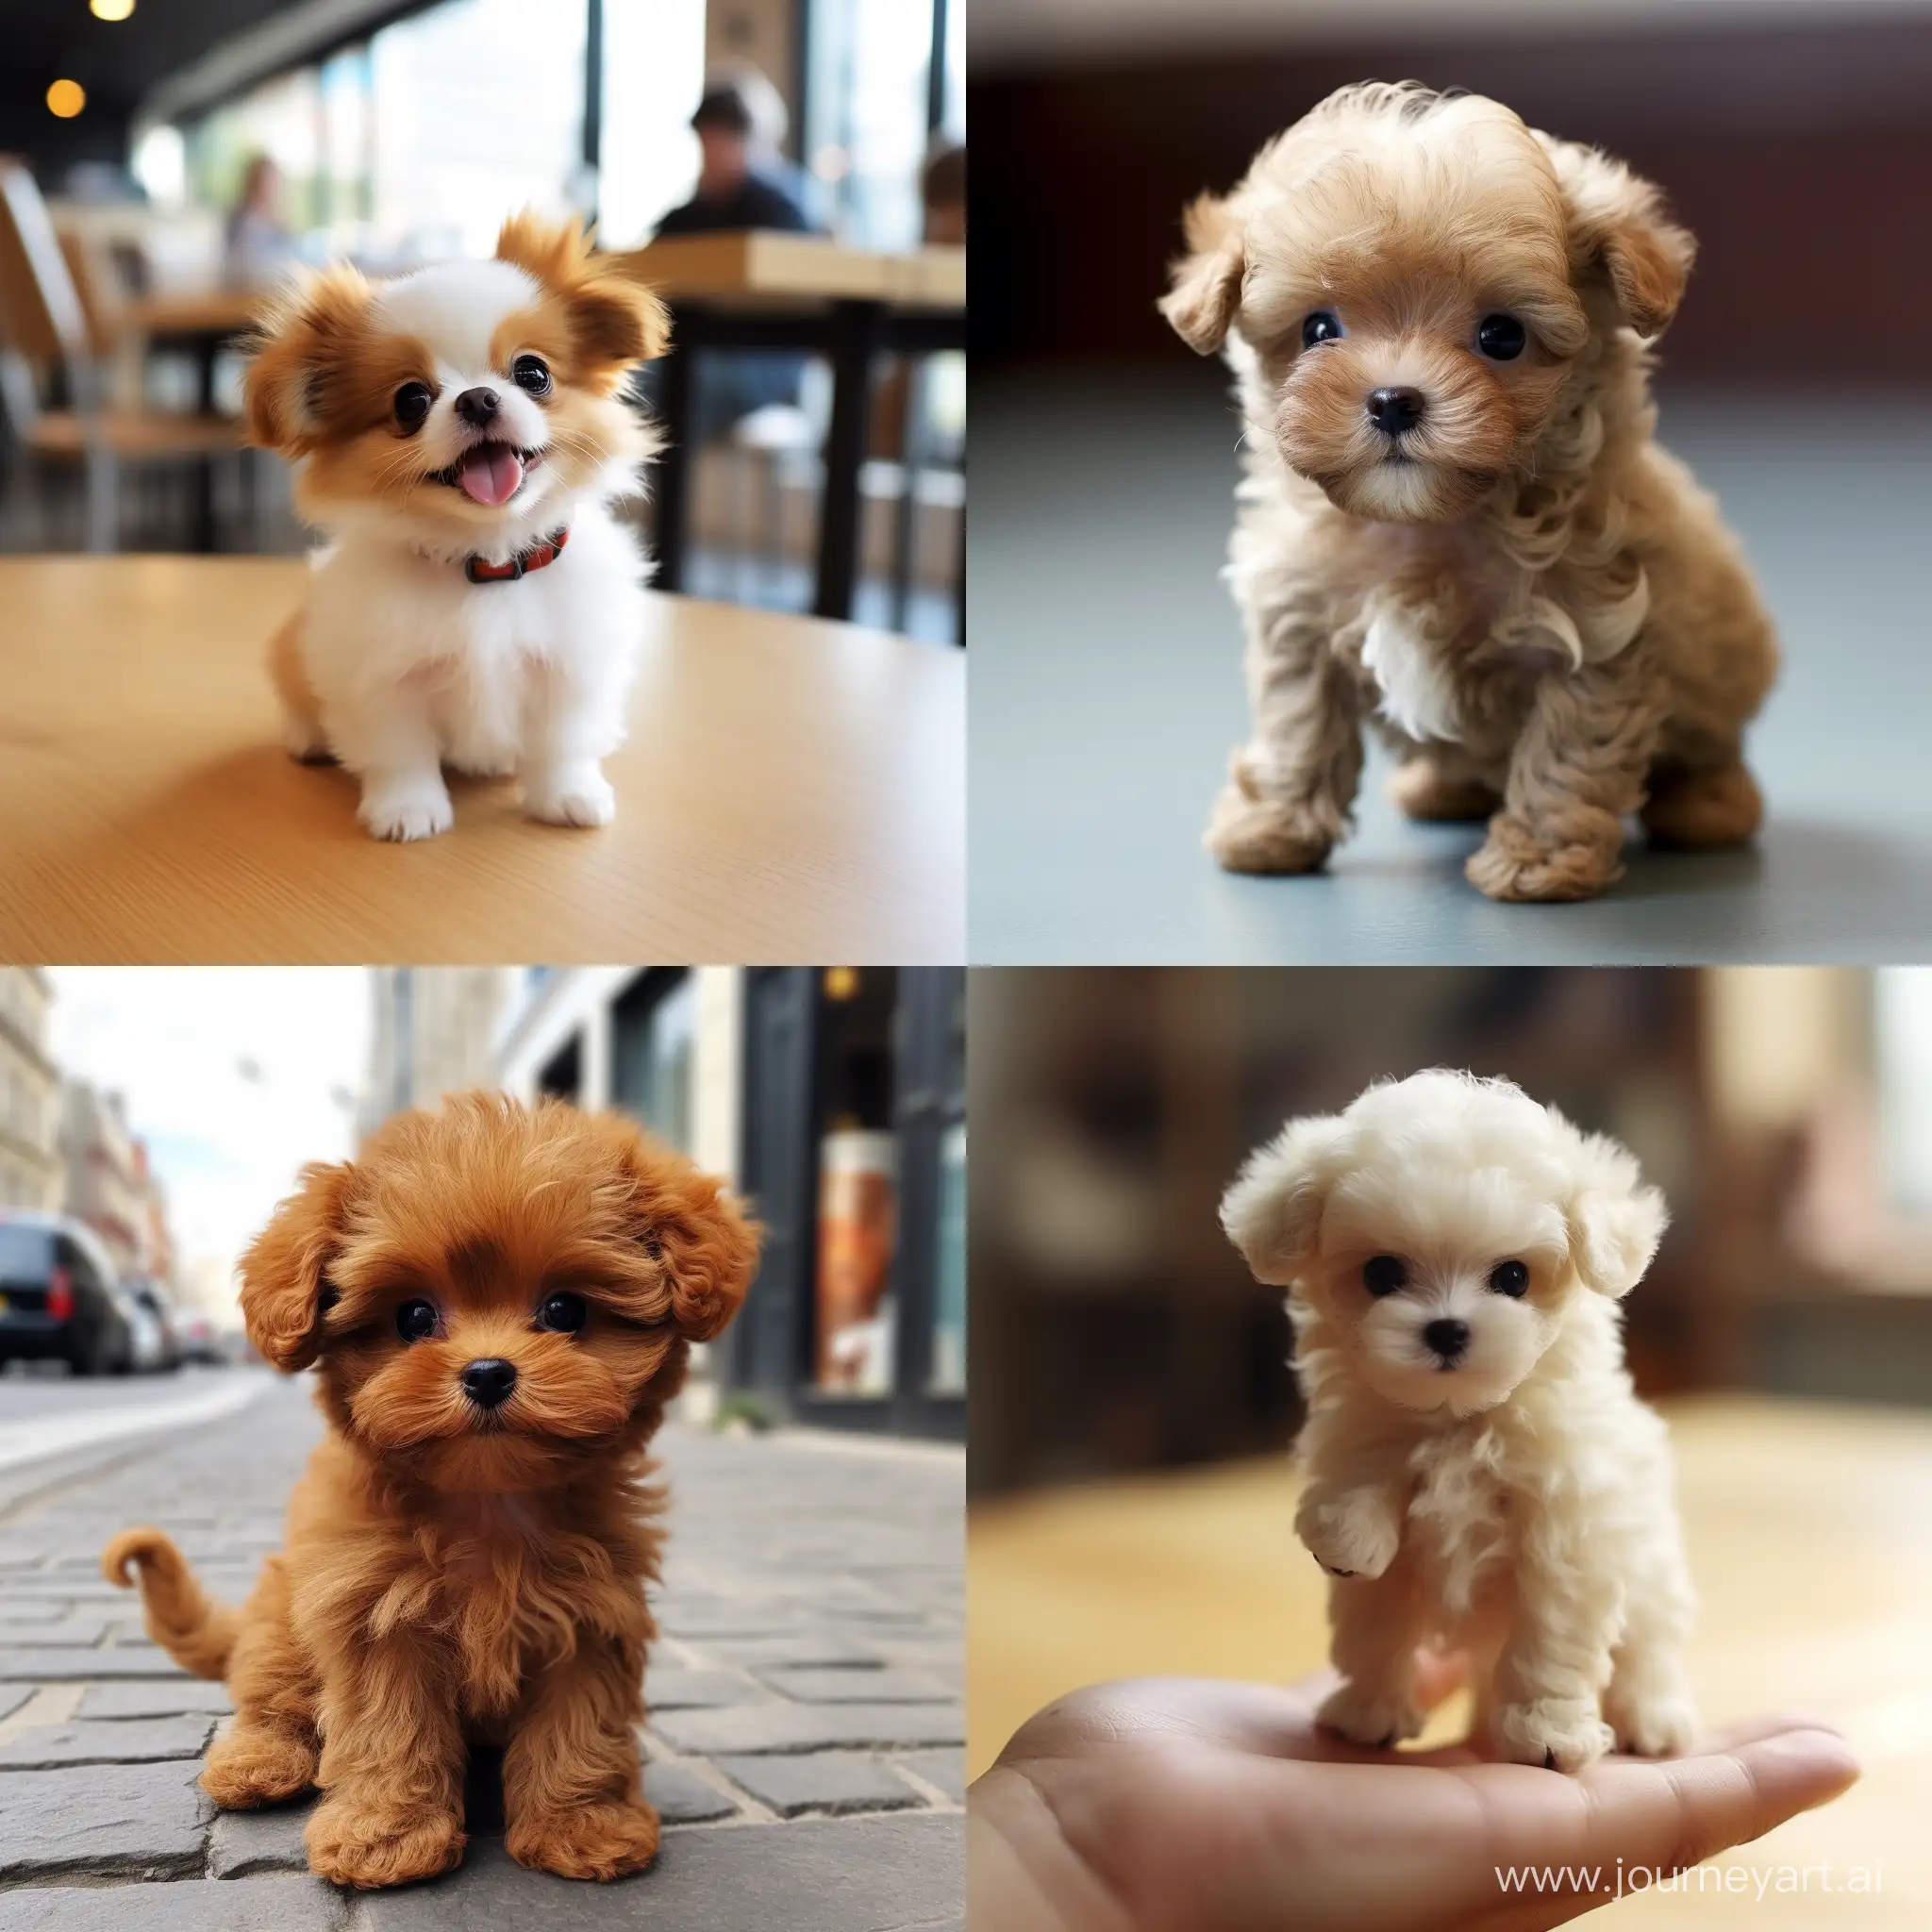 the cutest small dog, it should be cuter than any other small dog